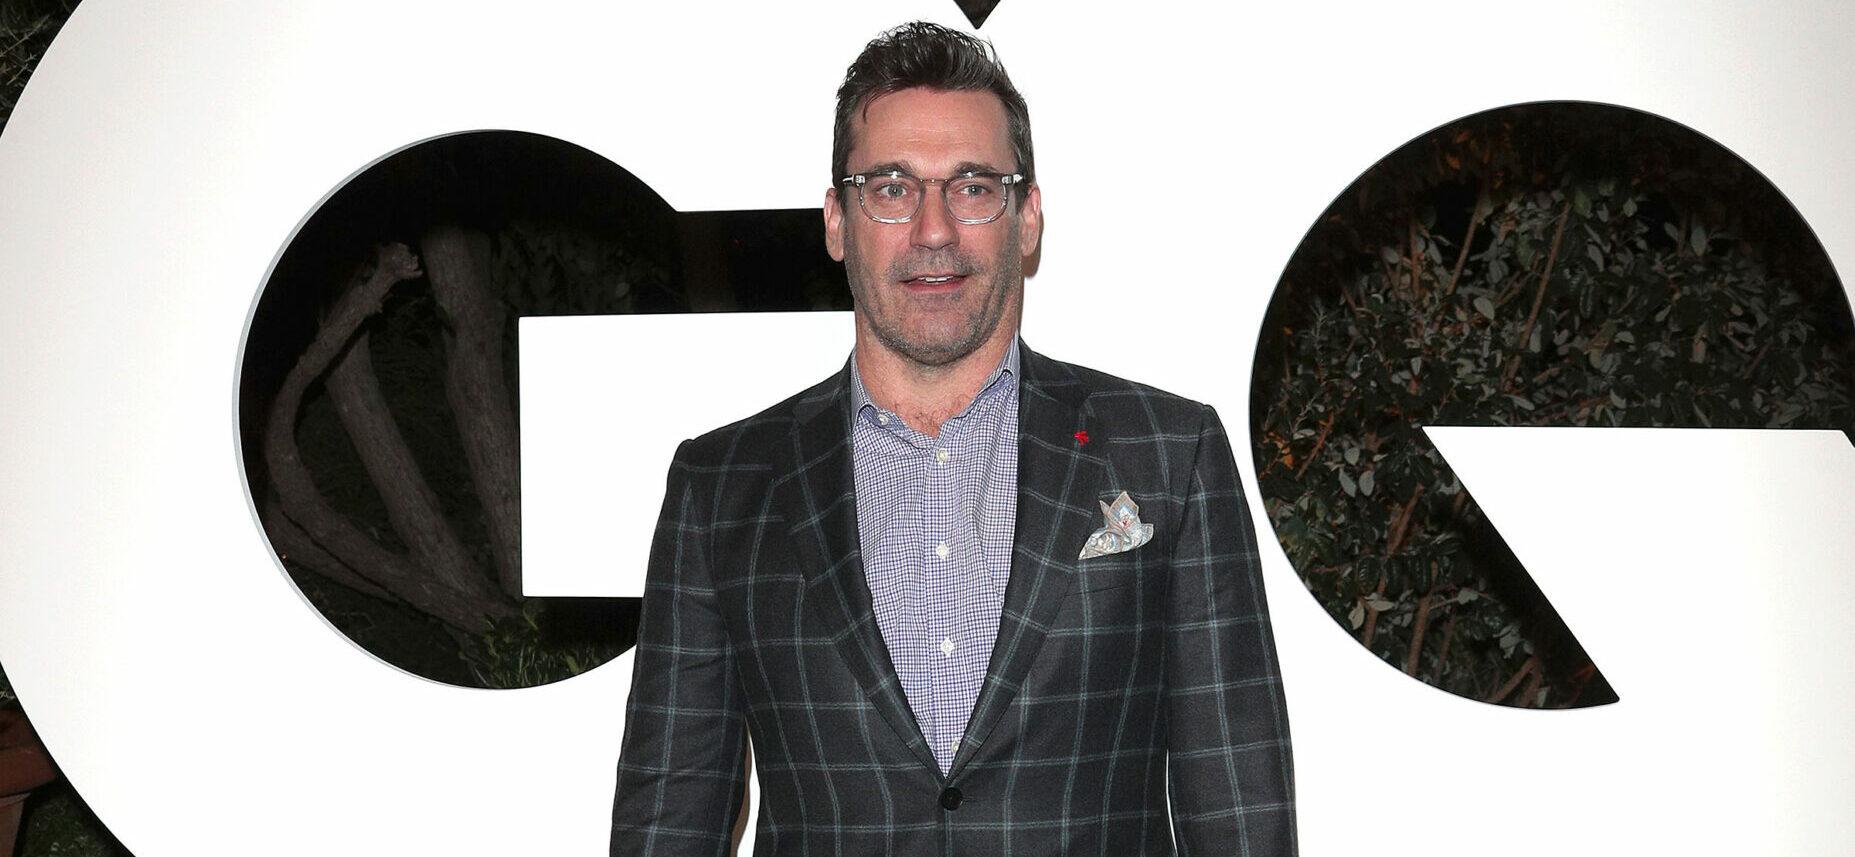 Unmarried Jon Hamm Thinks He Would Make A “Terrible Father”